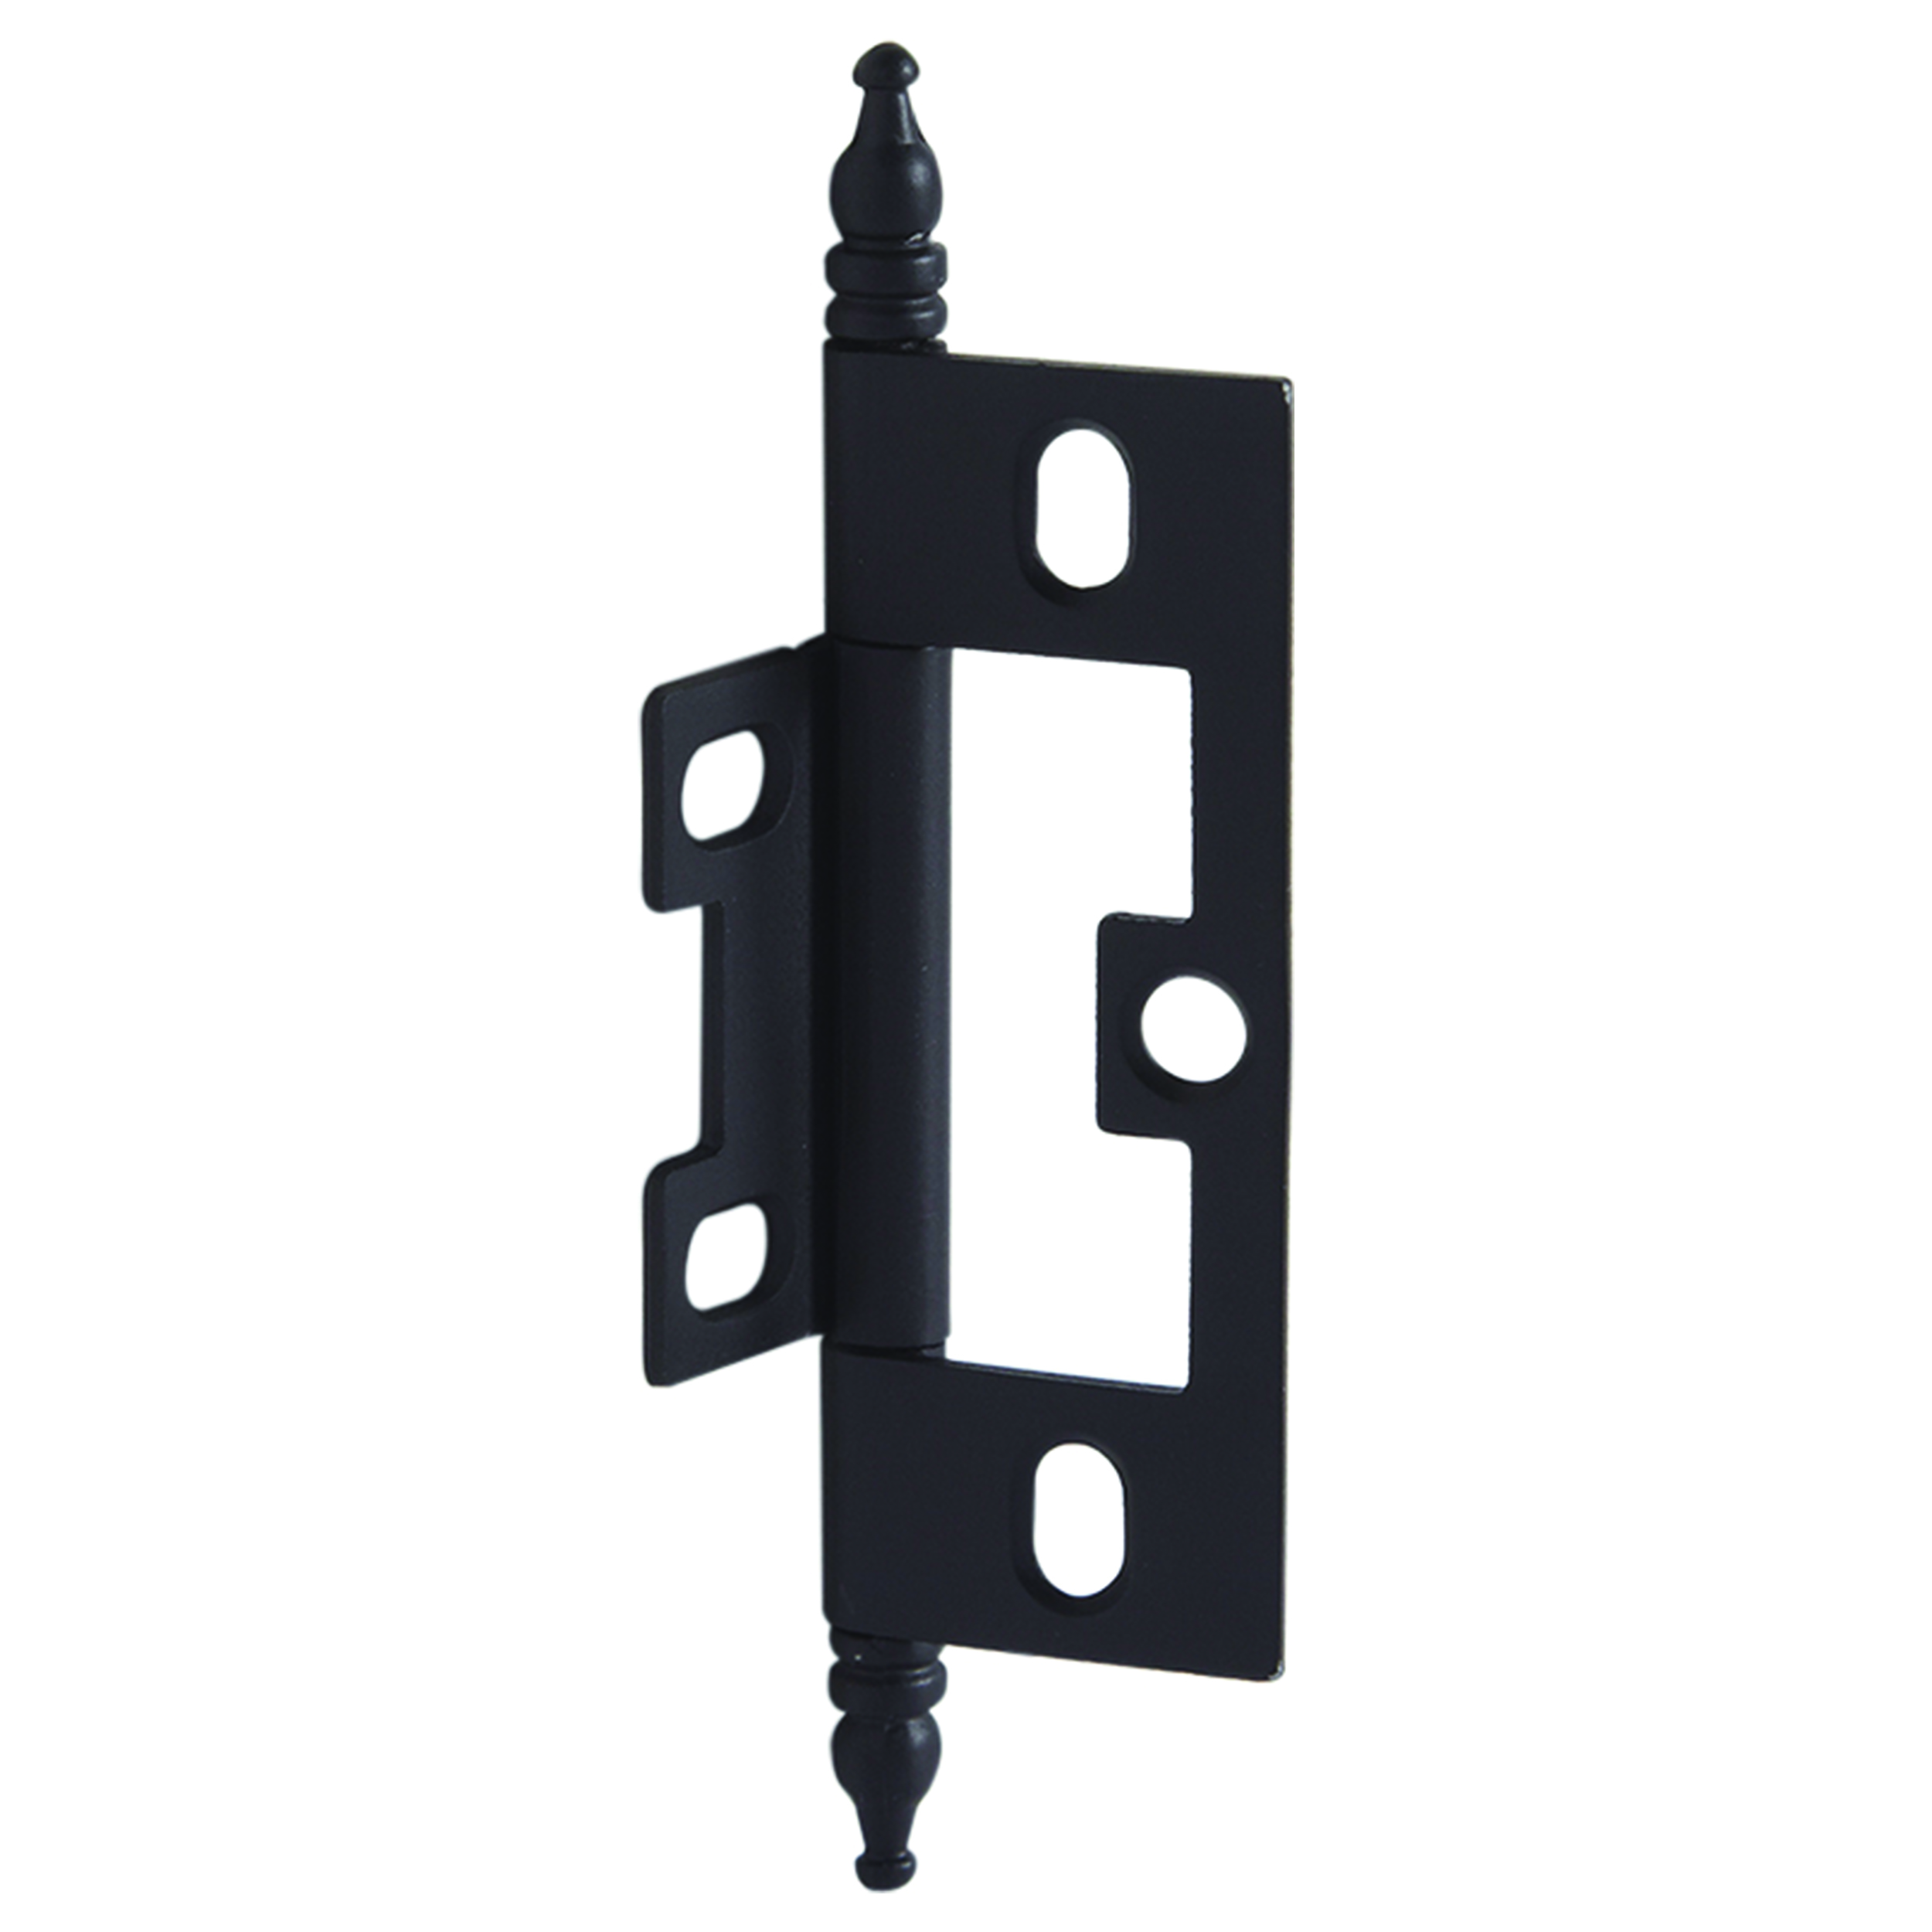 Non-mortised Decorative Butt Hinge With Finial In Dark Oil-rubbed Bronze - Model# 351.95.175